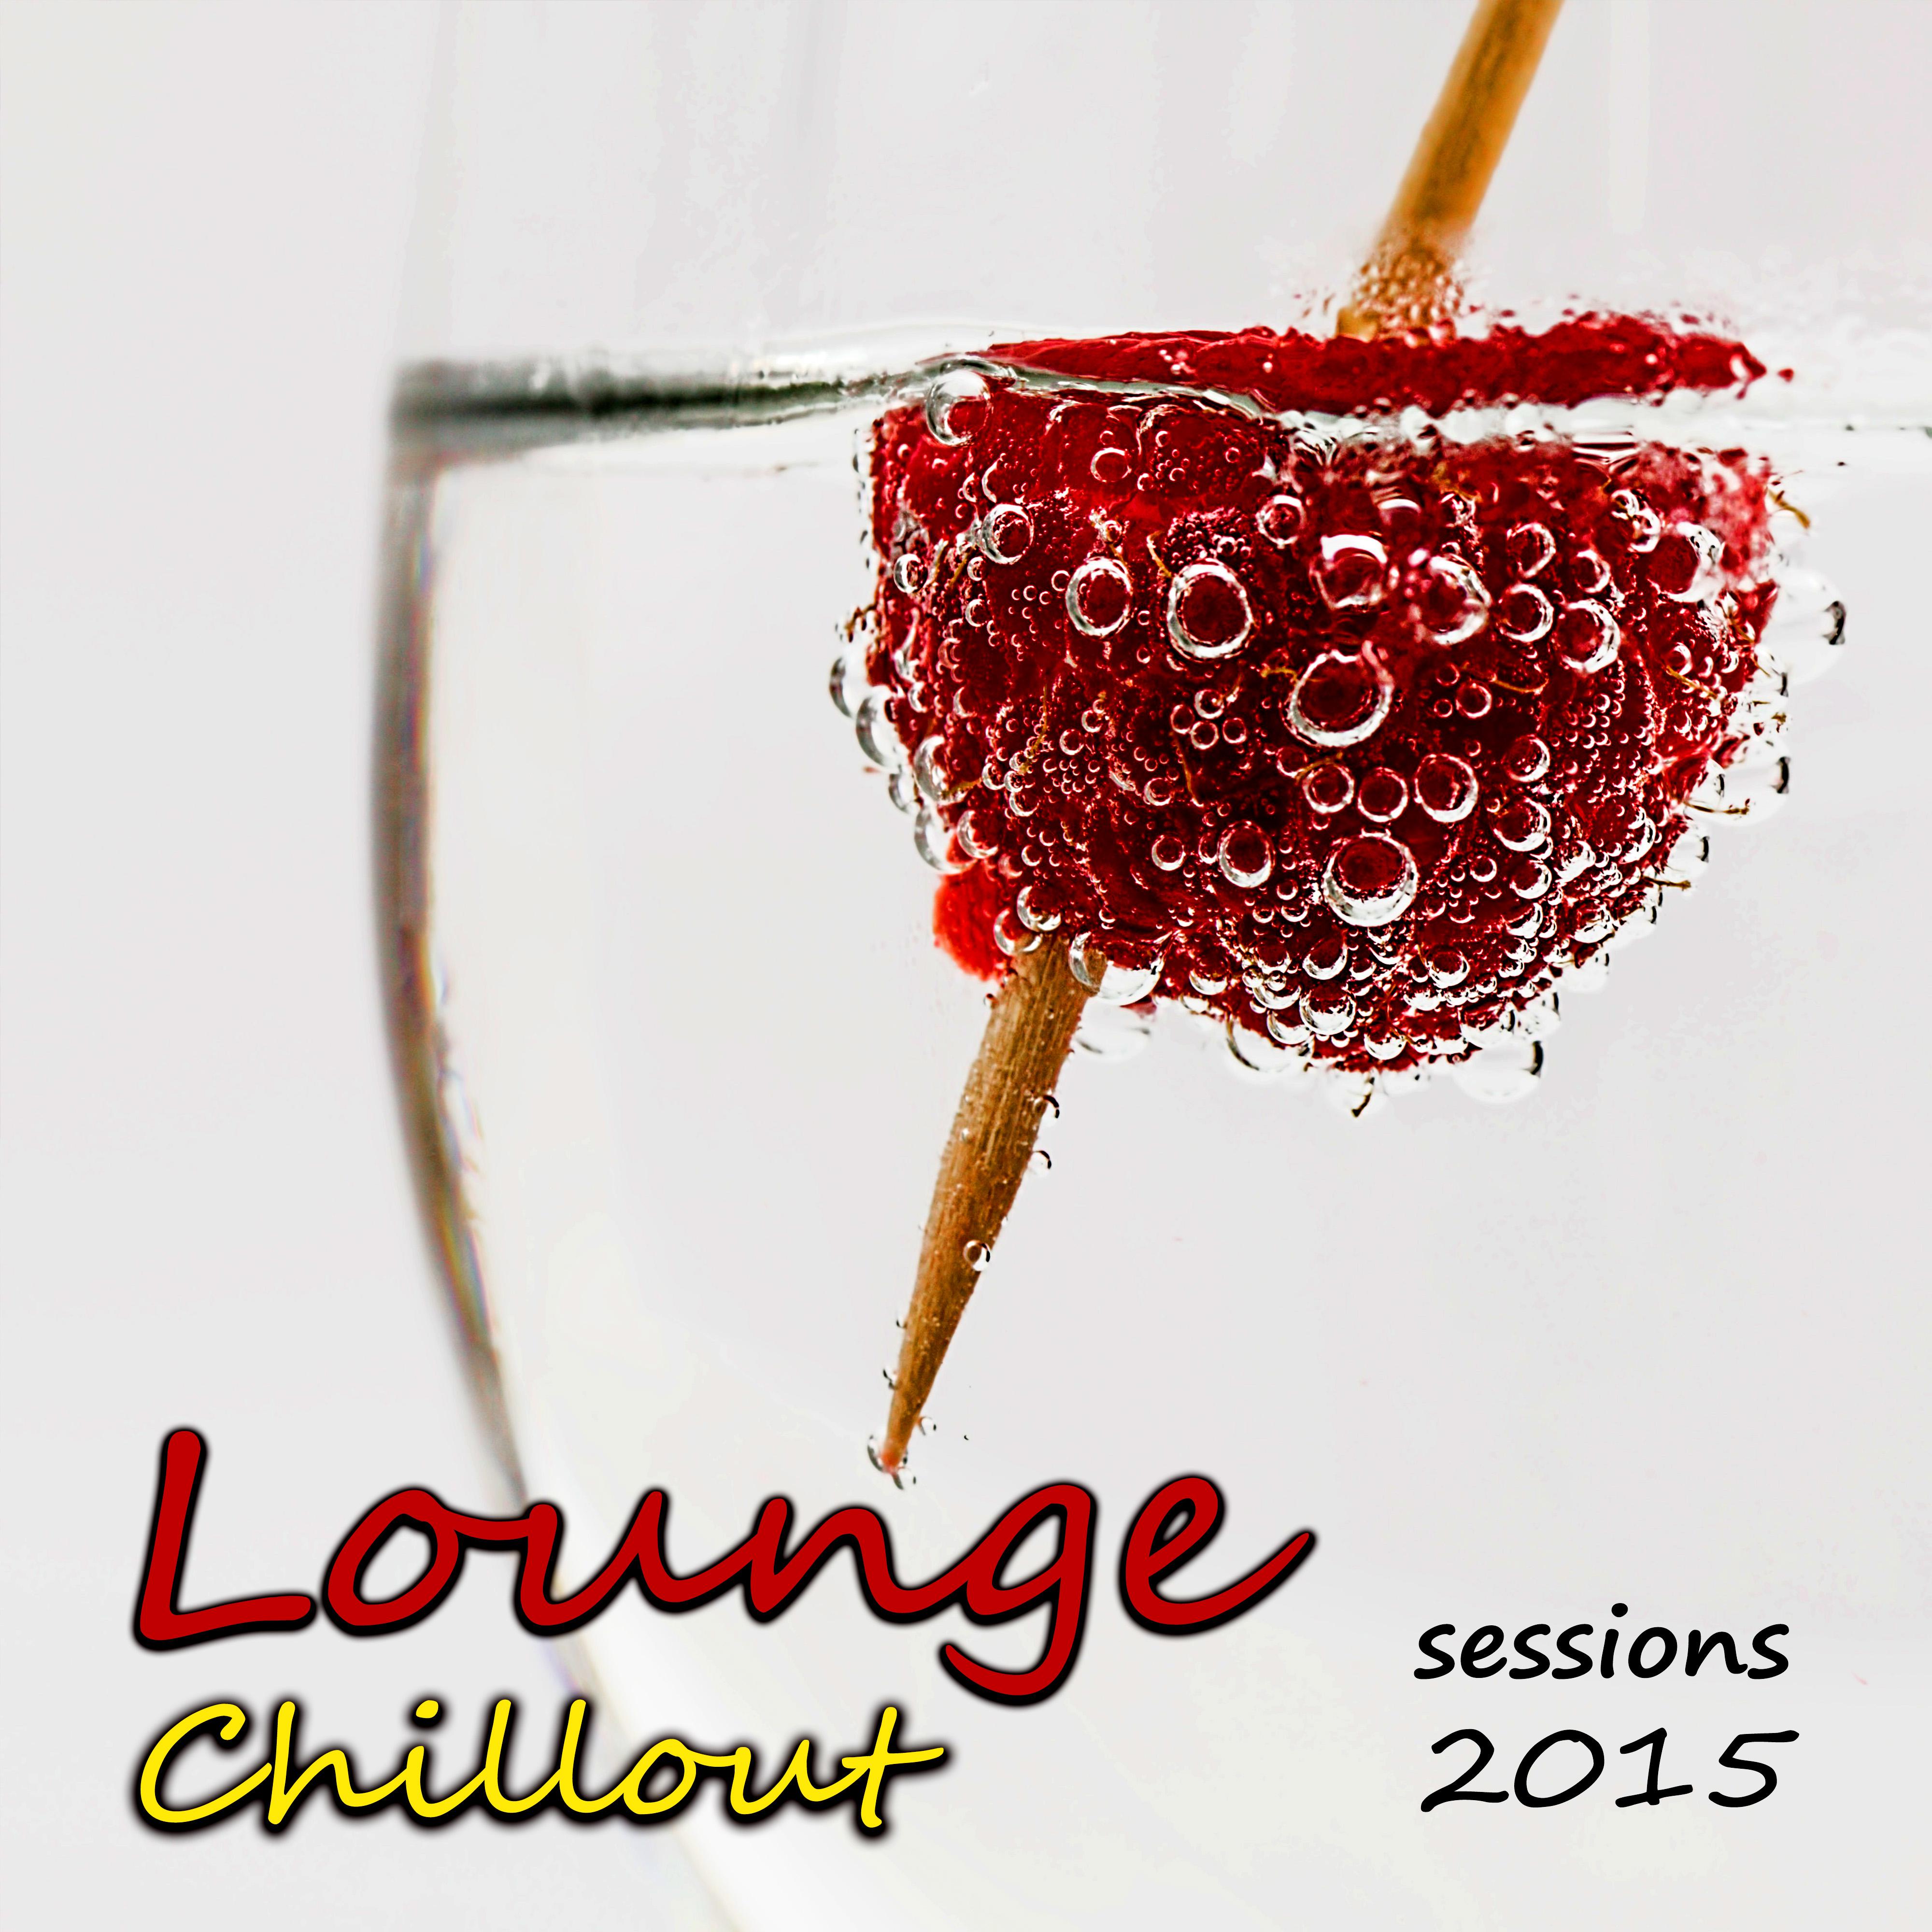 Lounge Chillout Sessions 2015